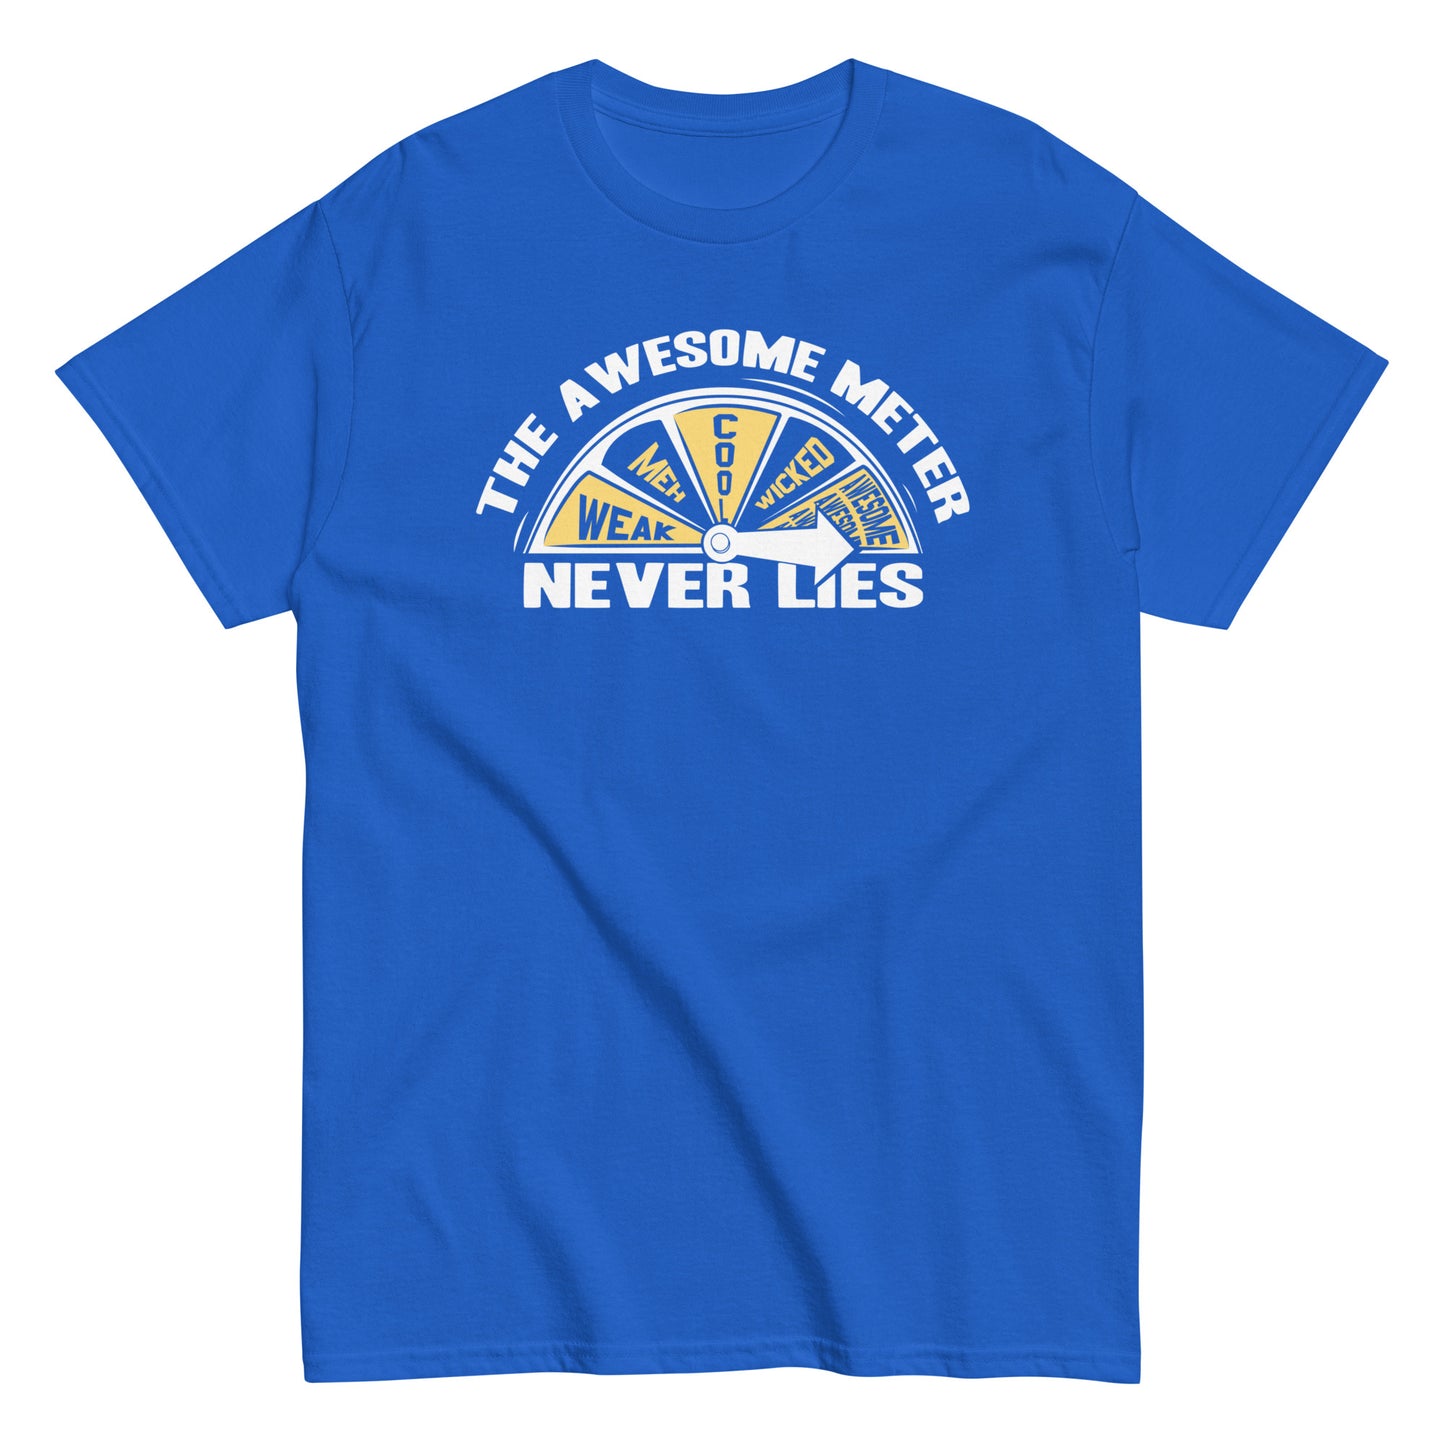 The Awesome Meter Men's Classic Tee